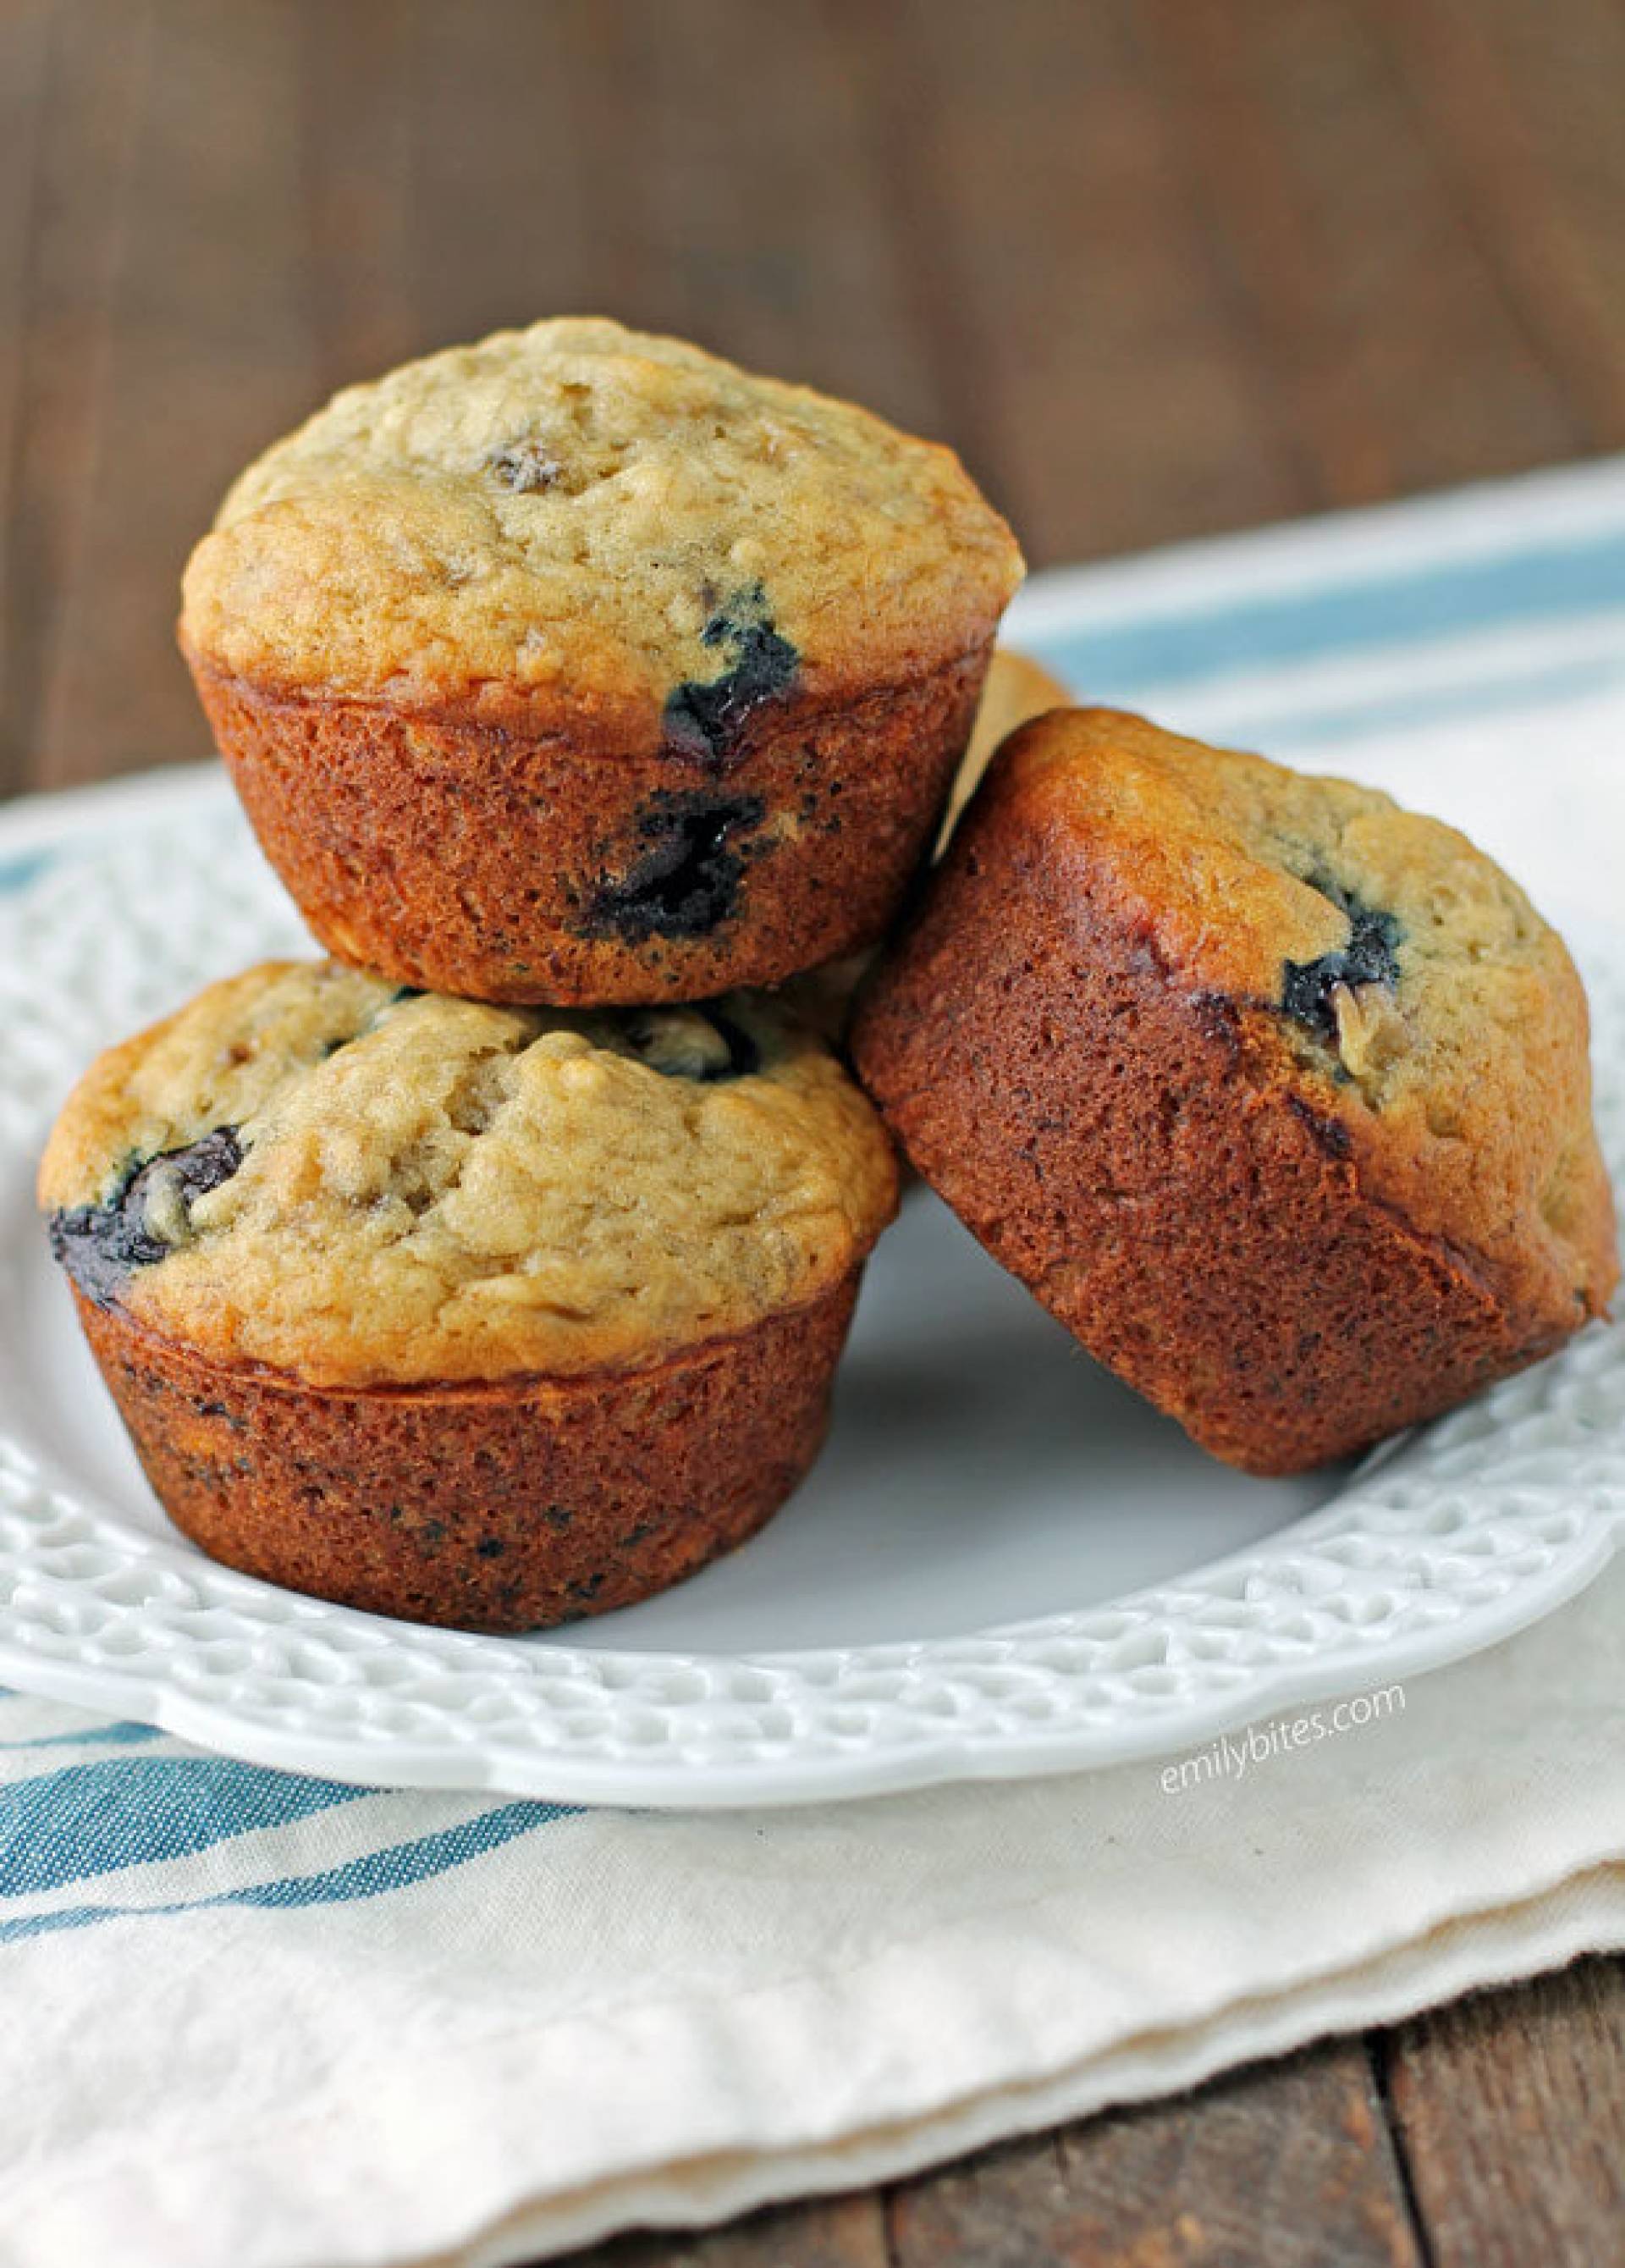 Blueberry Muffins with a Turkey Sausage Patty